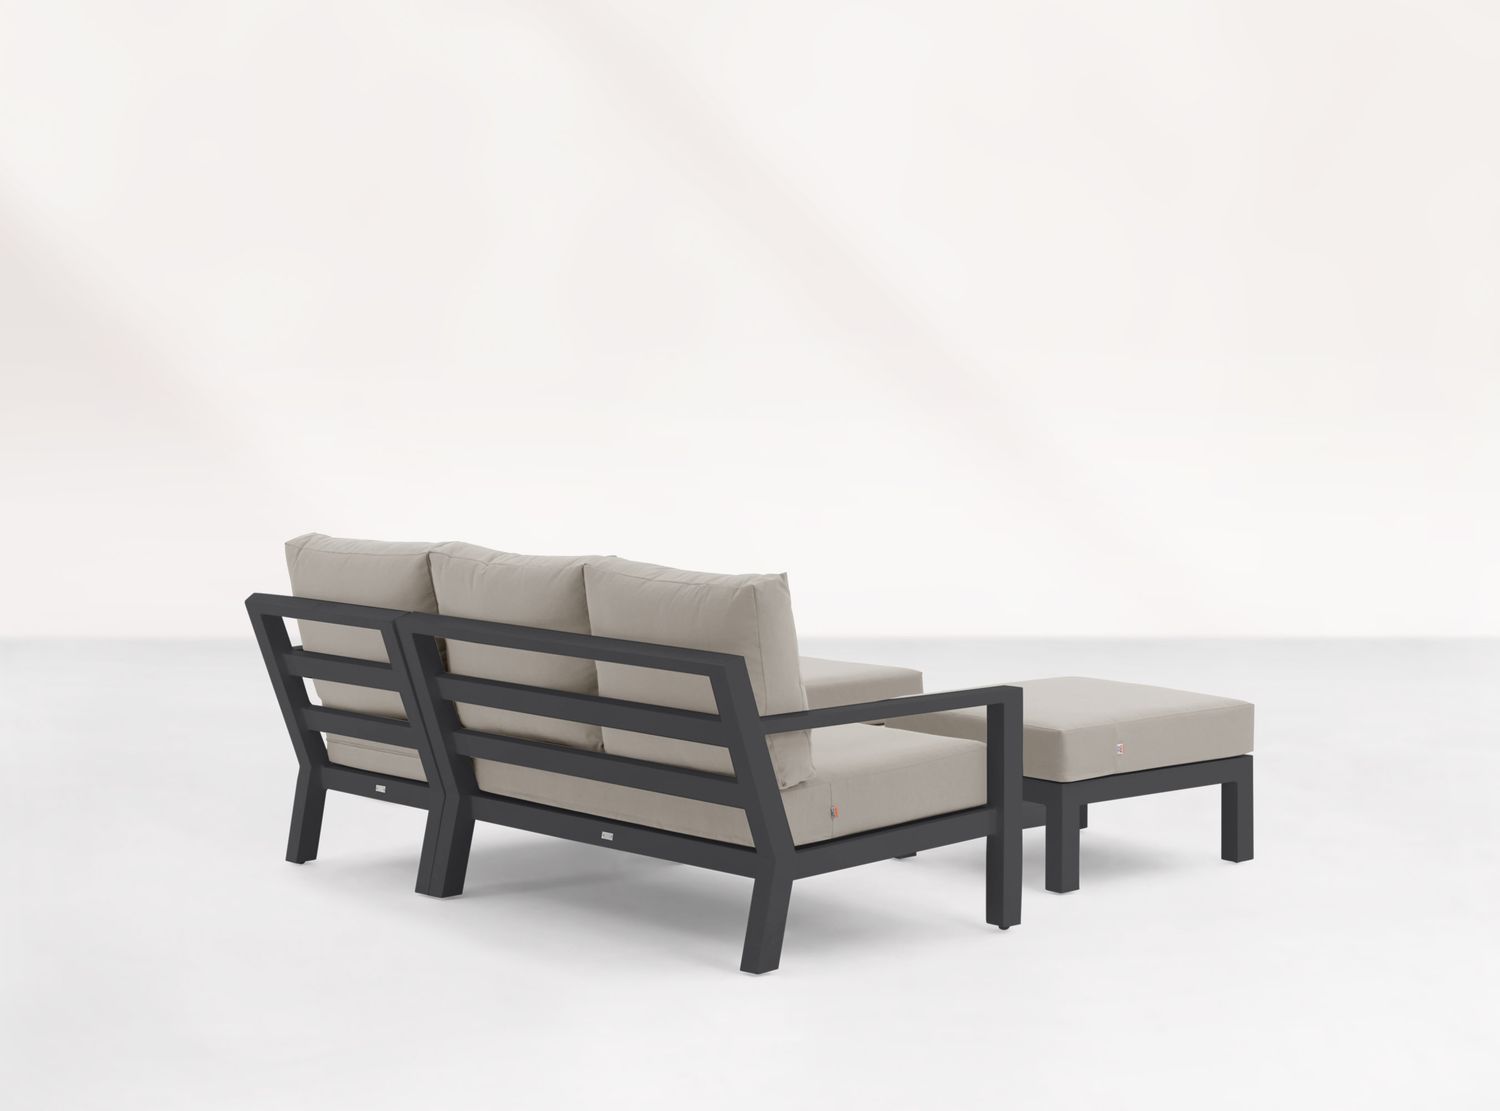 LIFE Dining-Loungeecke Set2 TIMBER lava inkl. Polster in